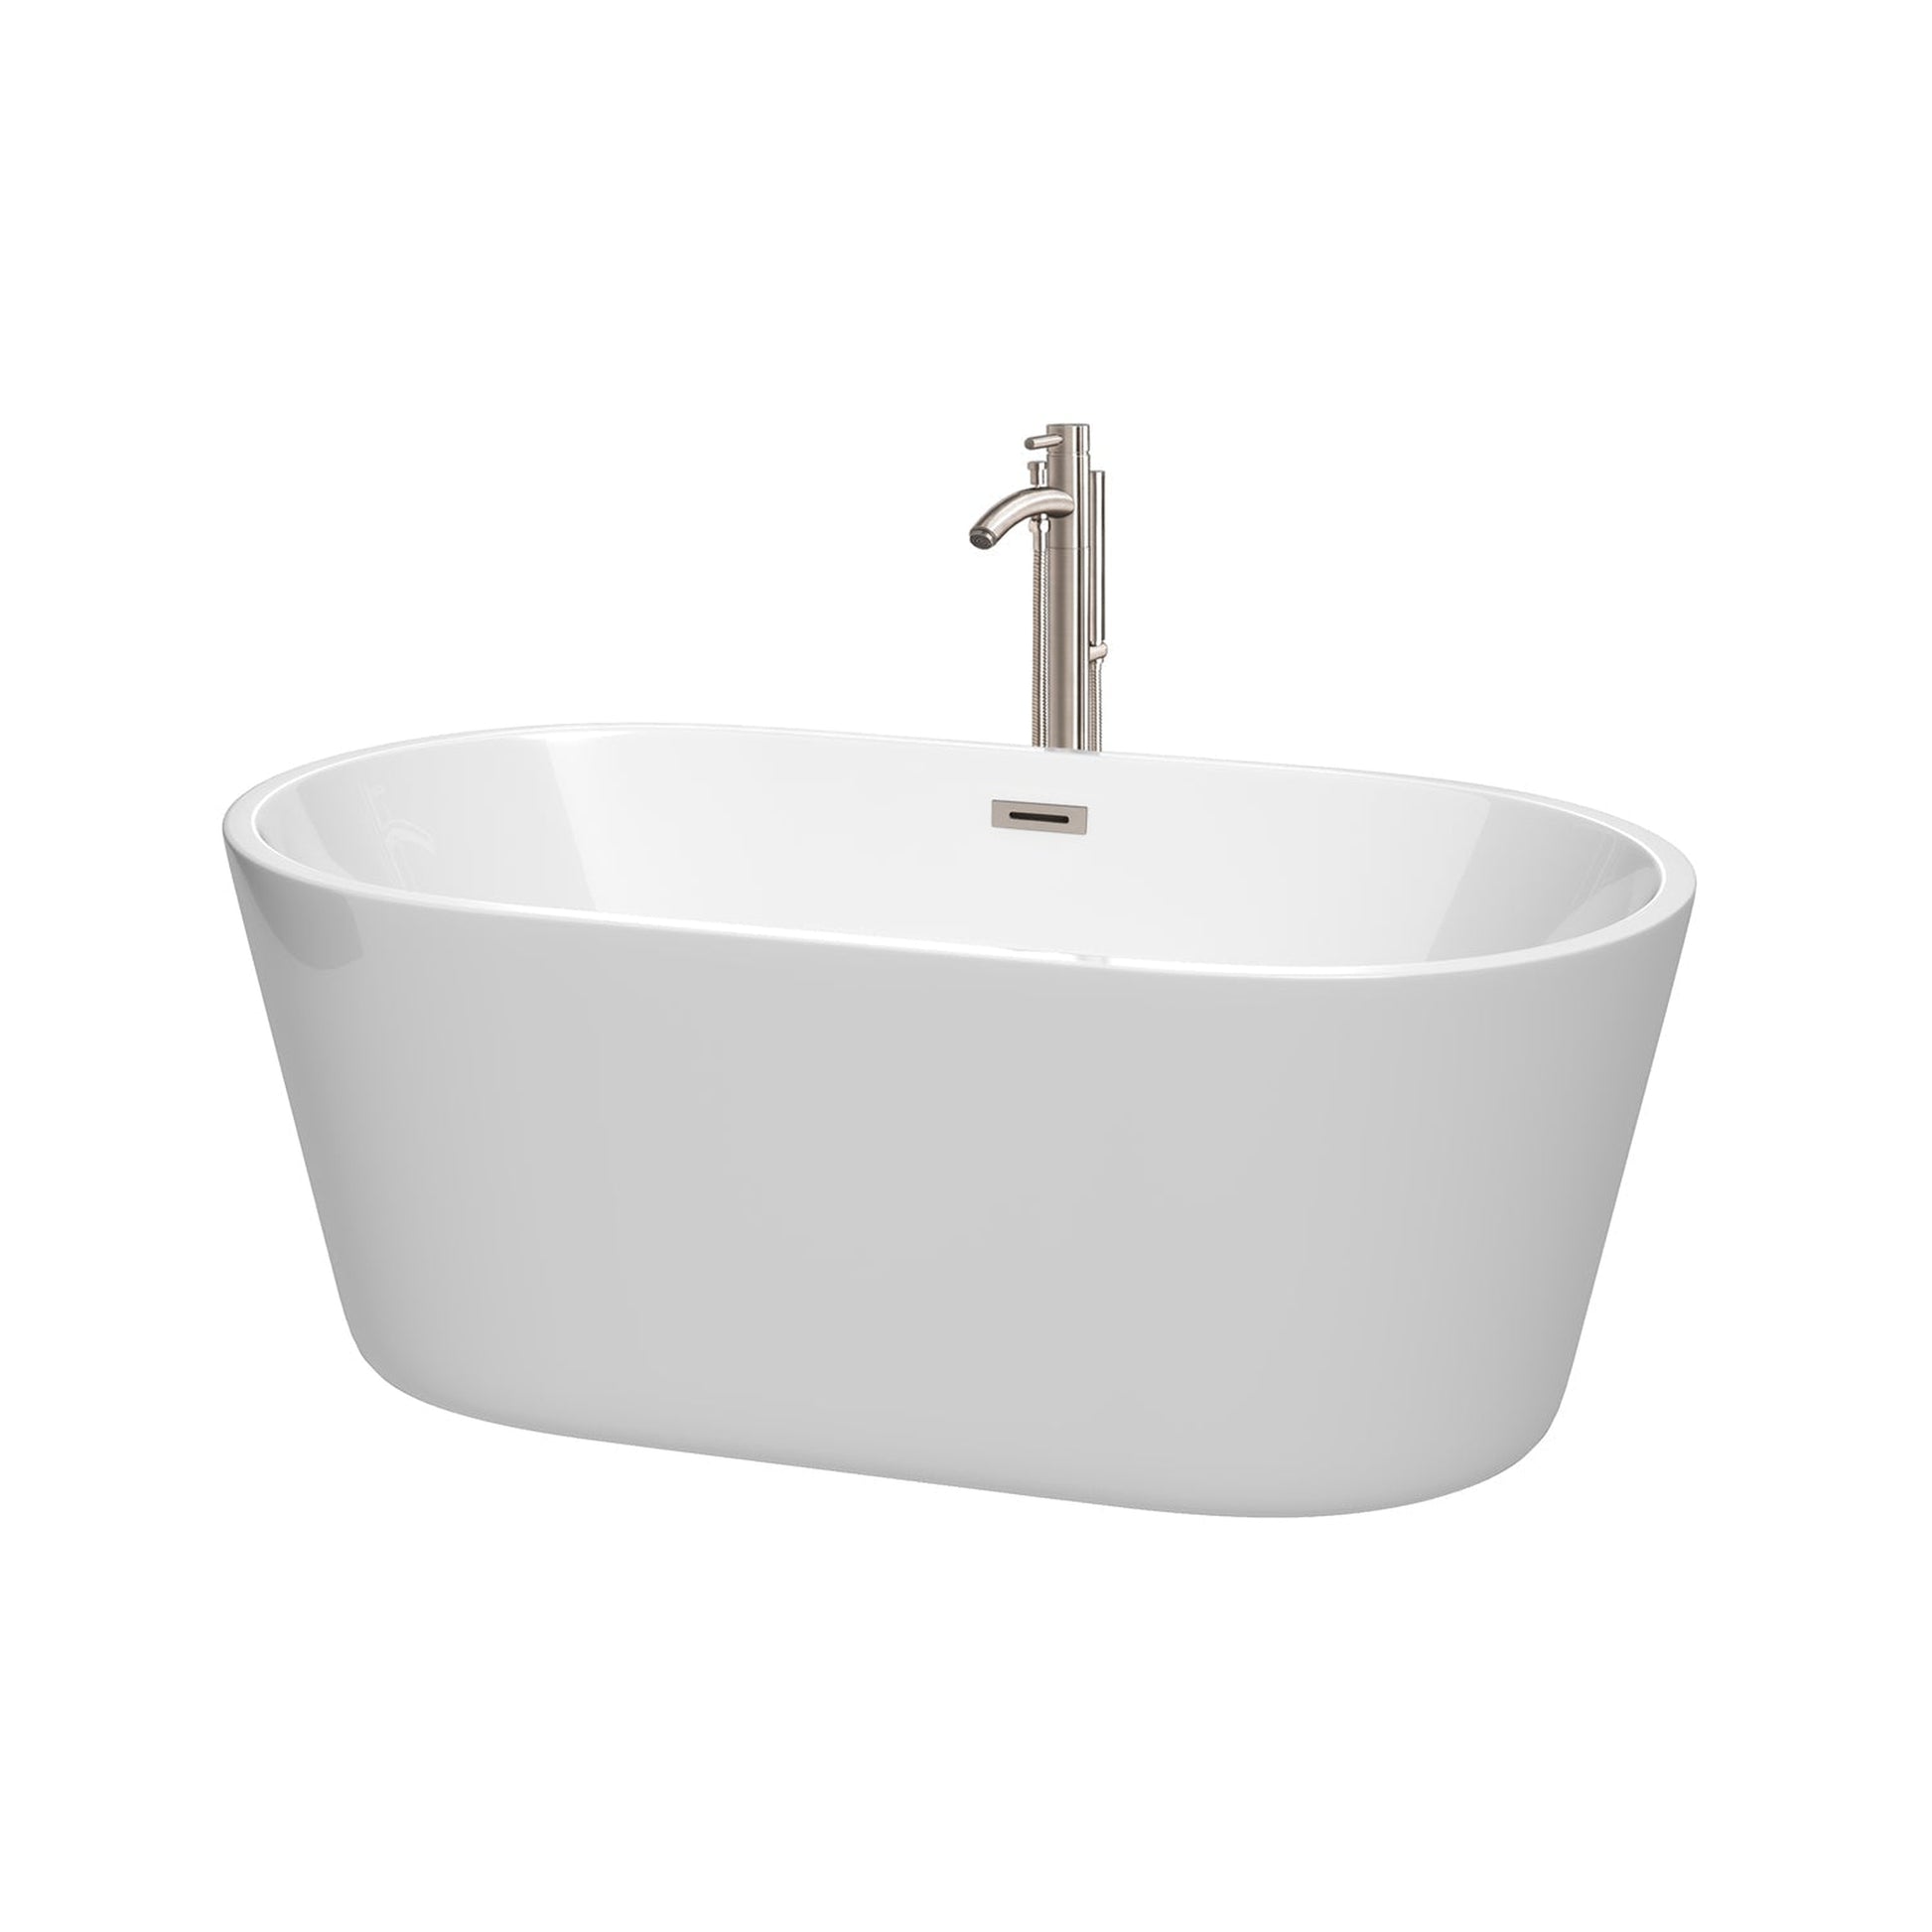 Wyndham Collection Carissa 60" Freestanding Bathtub in White With Floor Mounted Faucet, Drain and Overflow Trim in Brushed Nickel